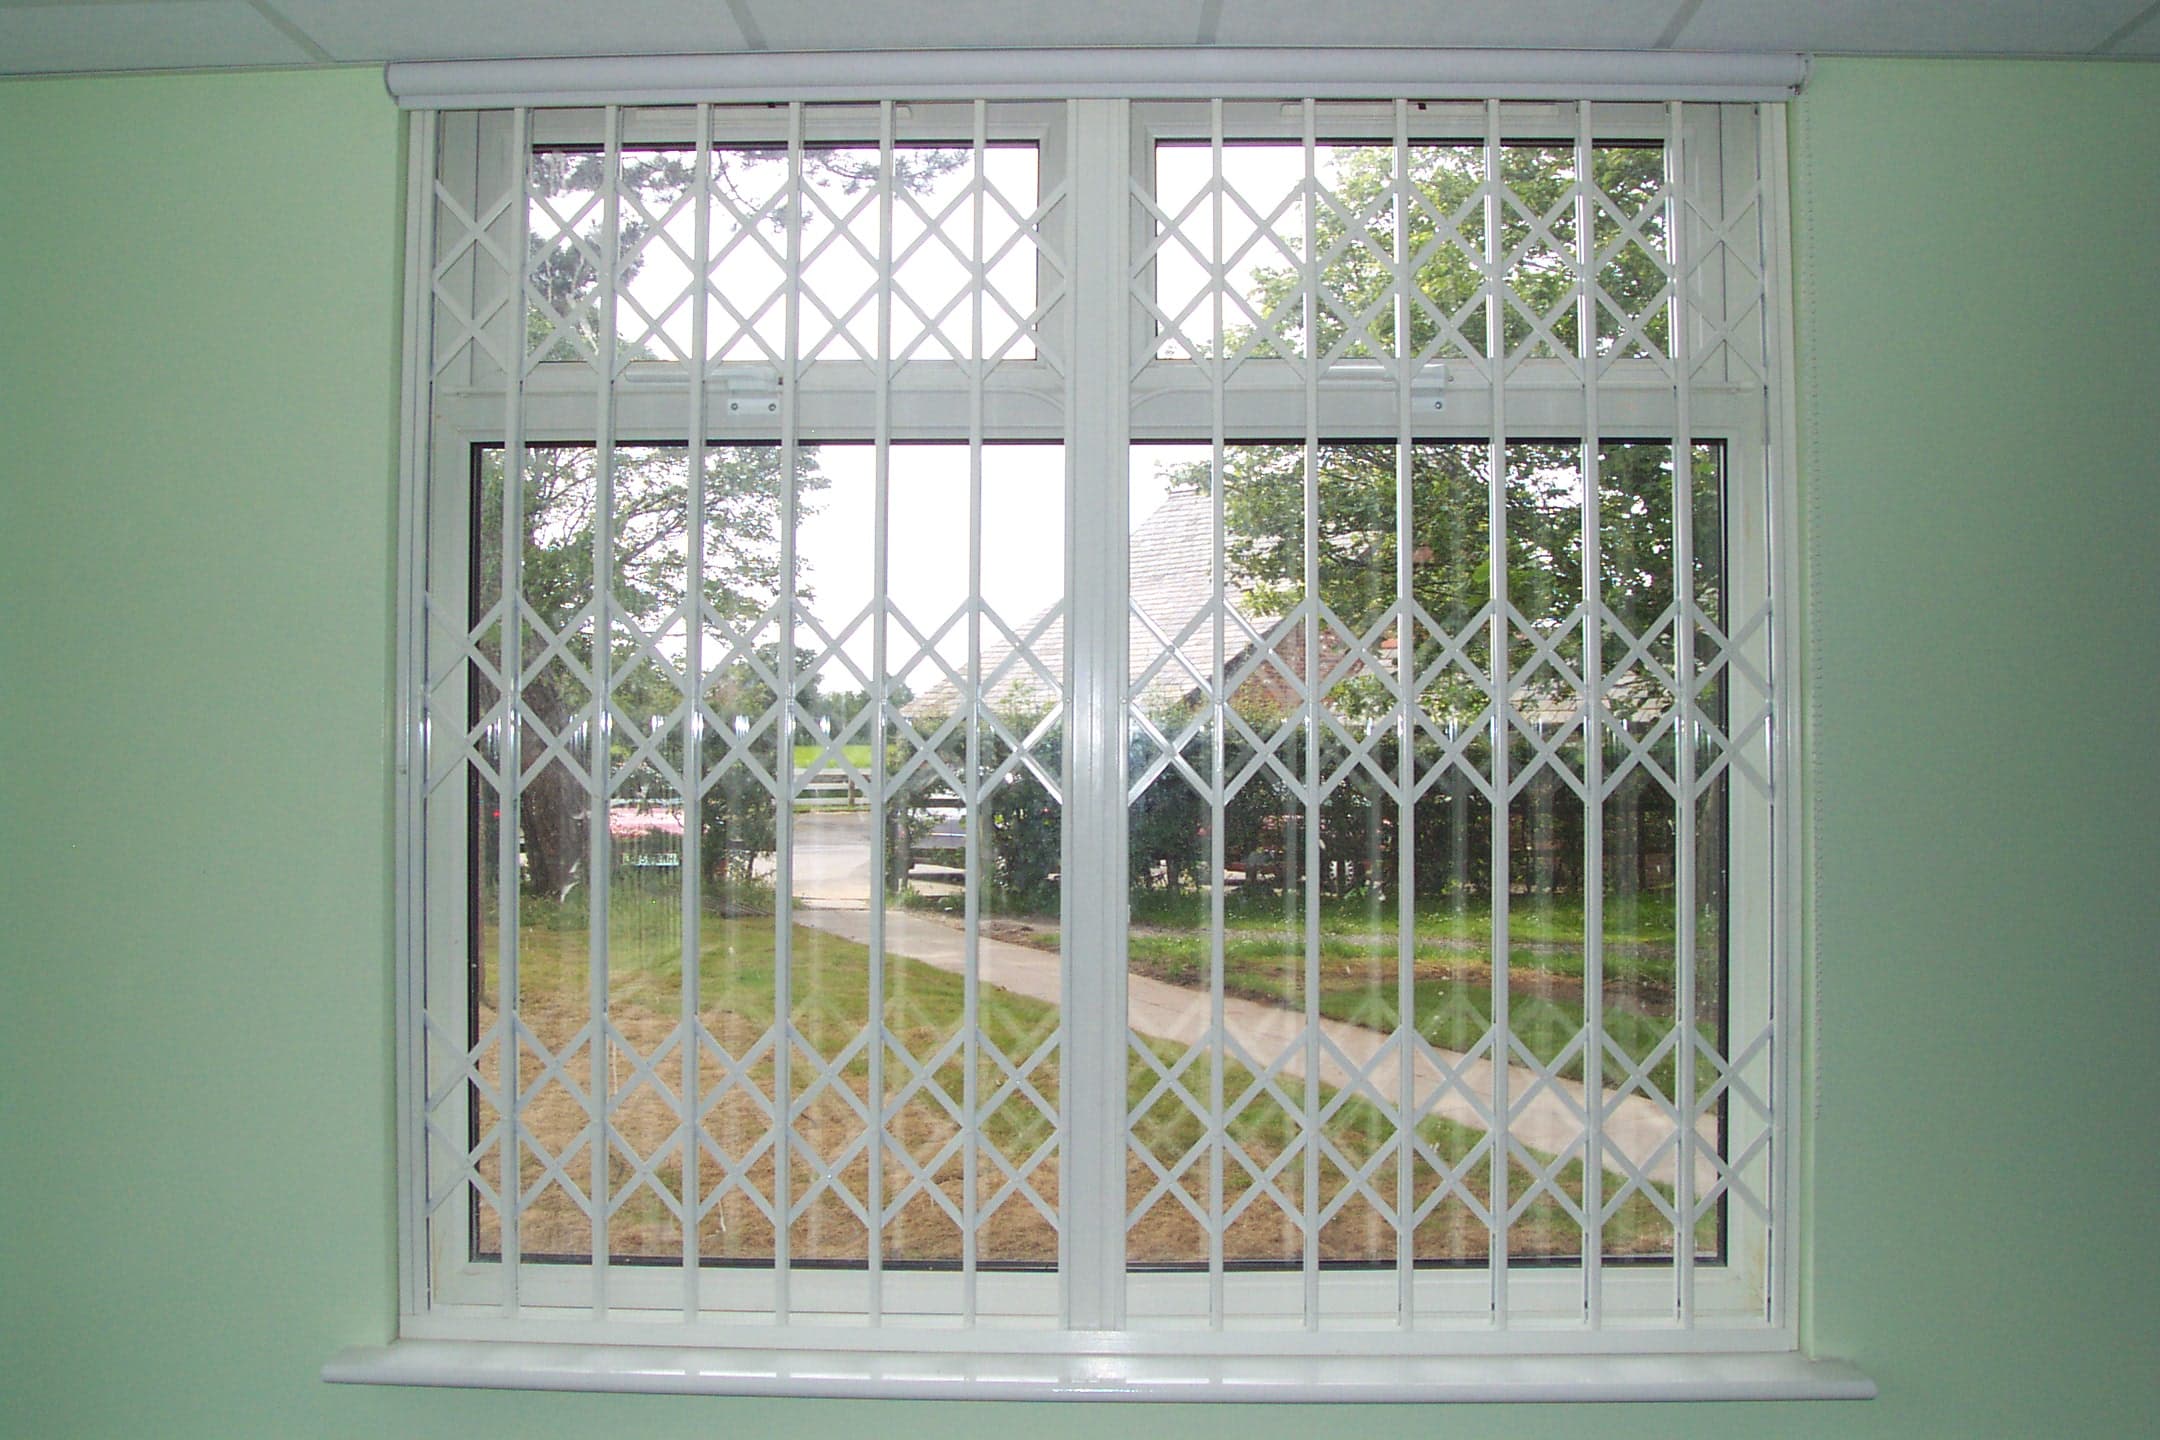 retractable security grilles for windows